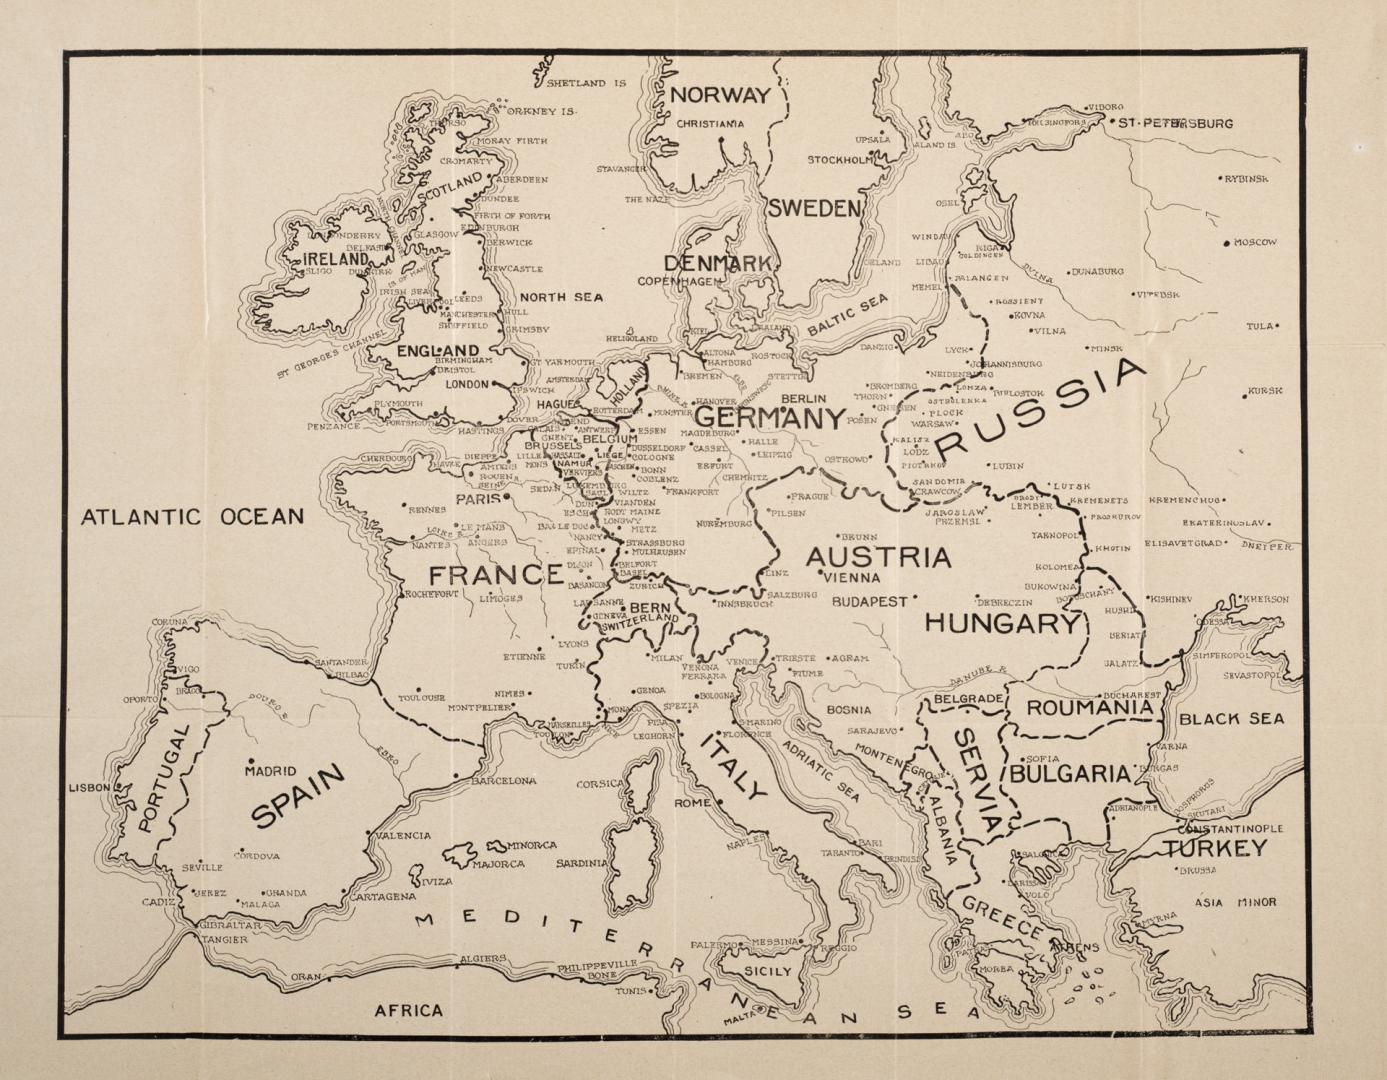 European war map showing the countries involved, principal cities, towns, and fortified positions